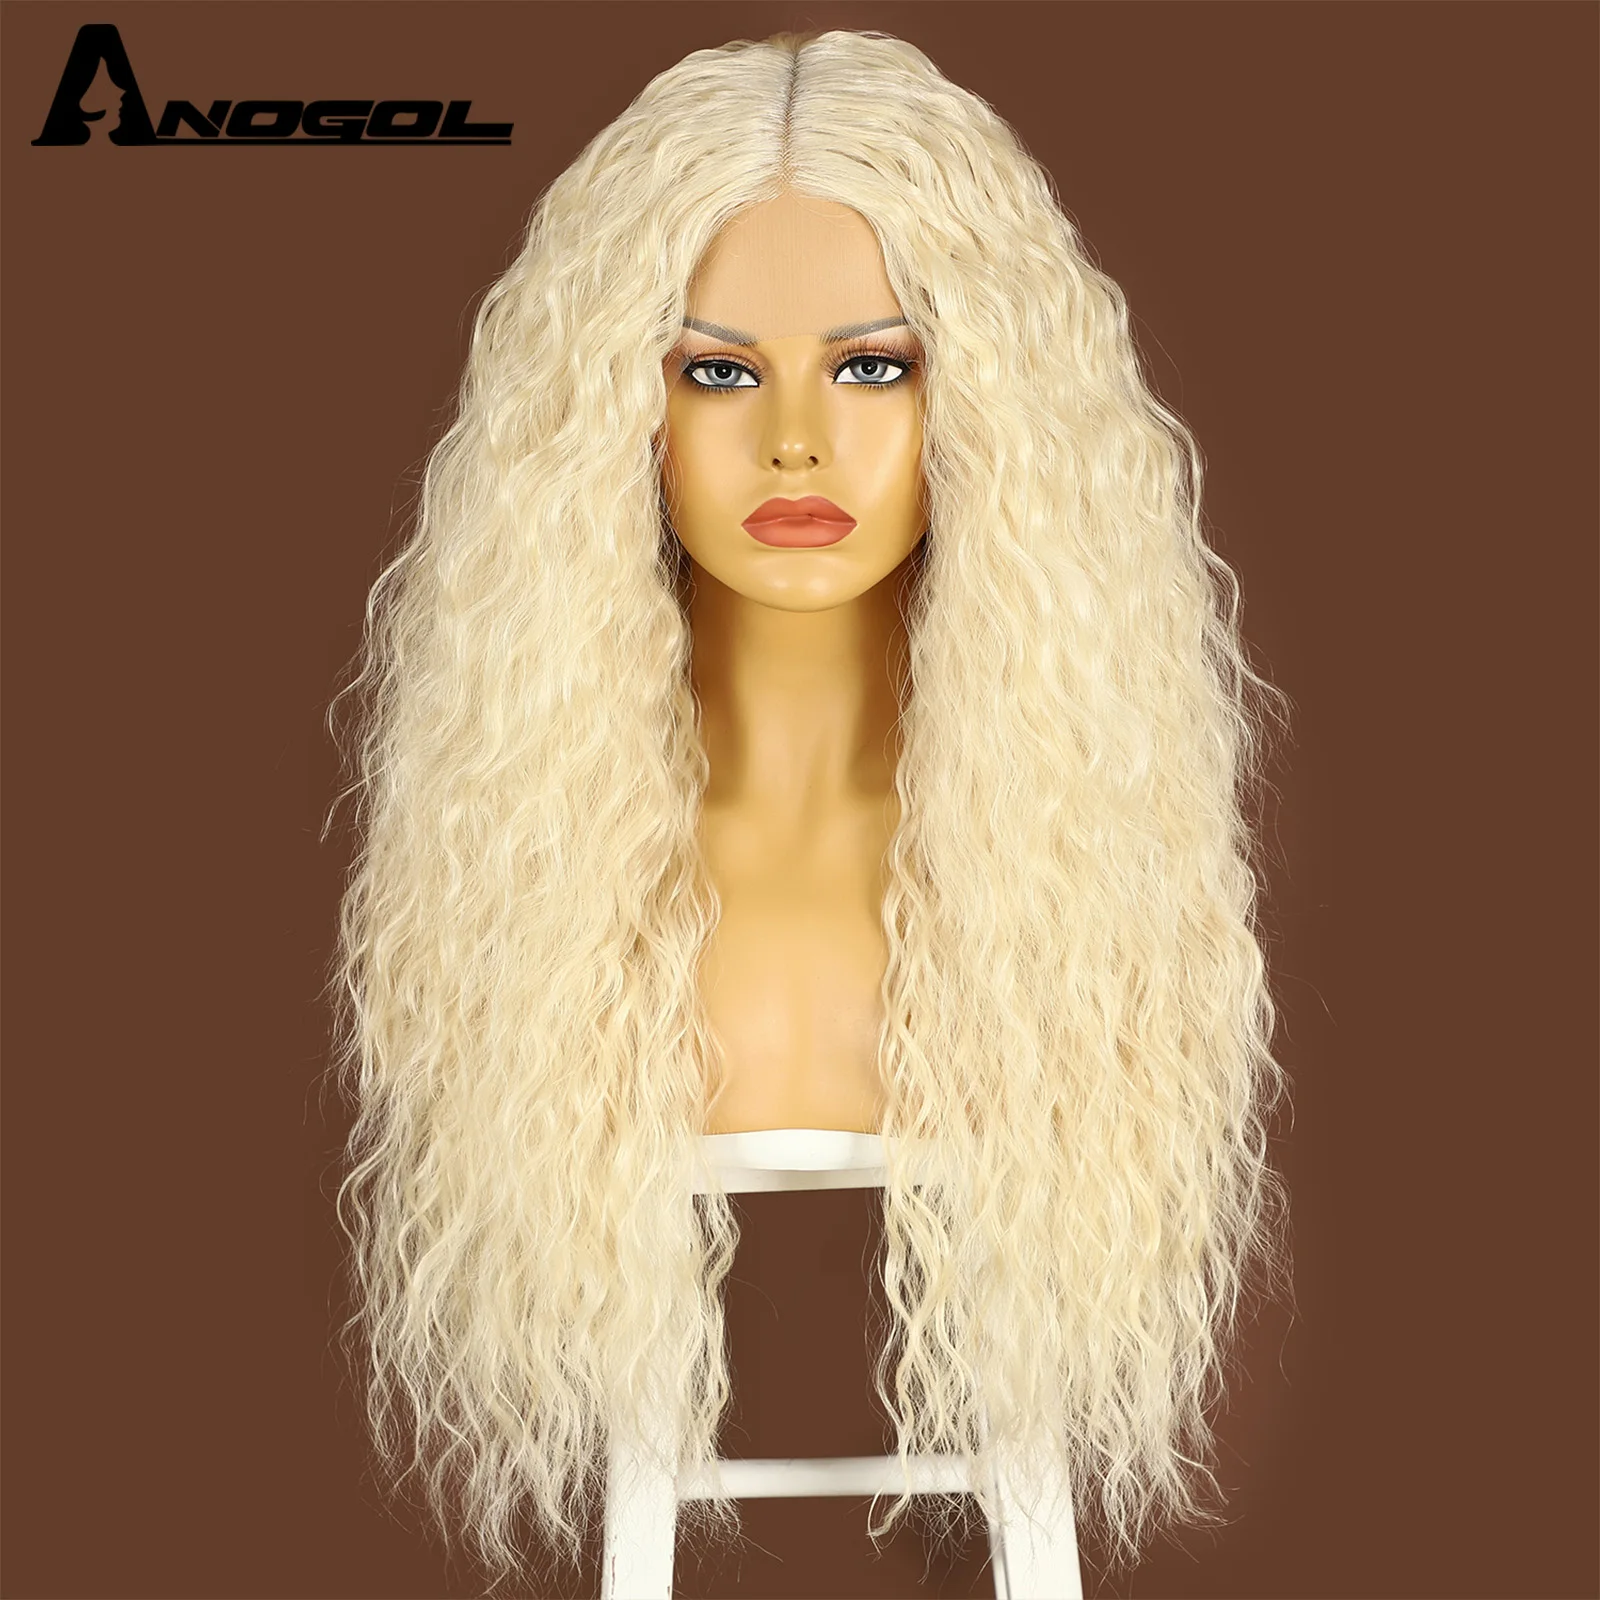 ANOGOL Synthetic Wigs 28IN TPart Lace Natural Black Water Wave Middle Part Hair PrePlucked Blonde Kink Curly Color Wig For Women